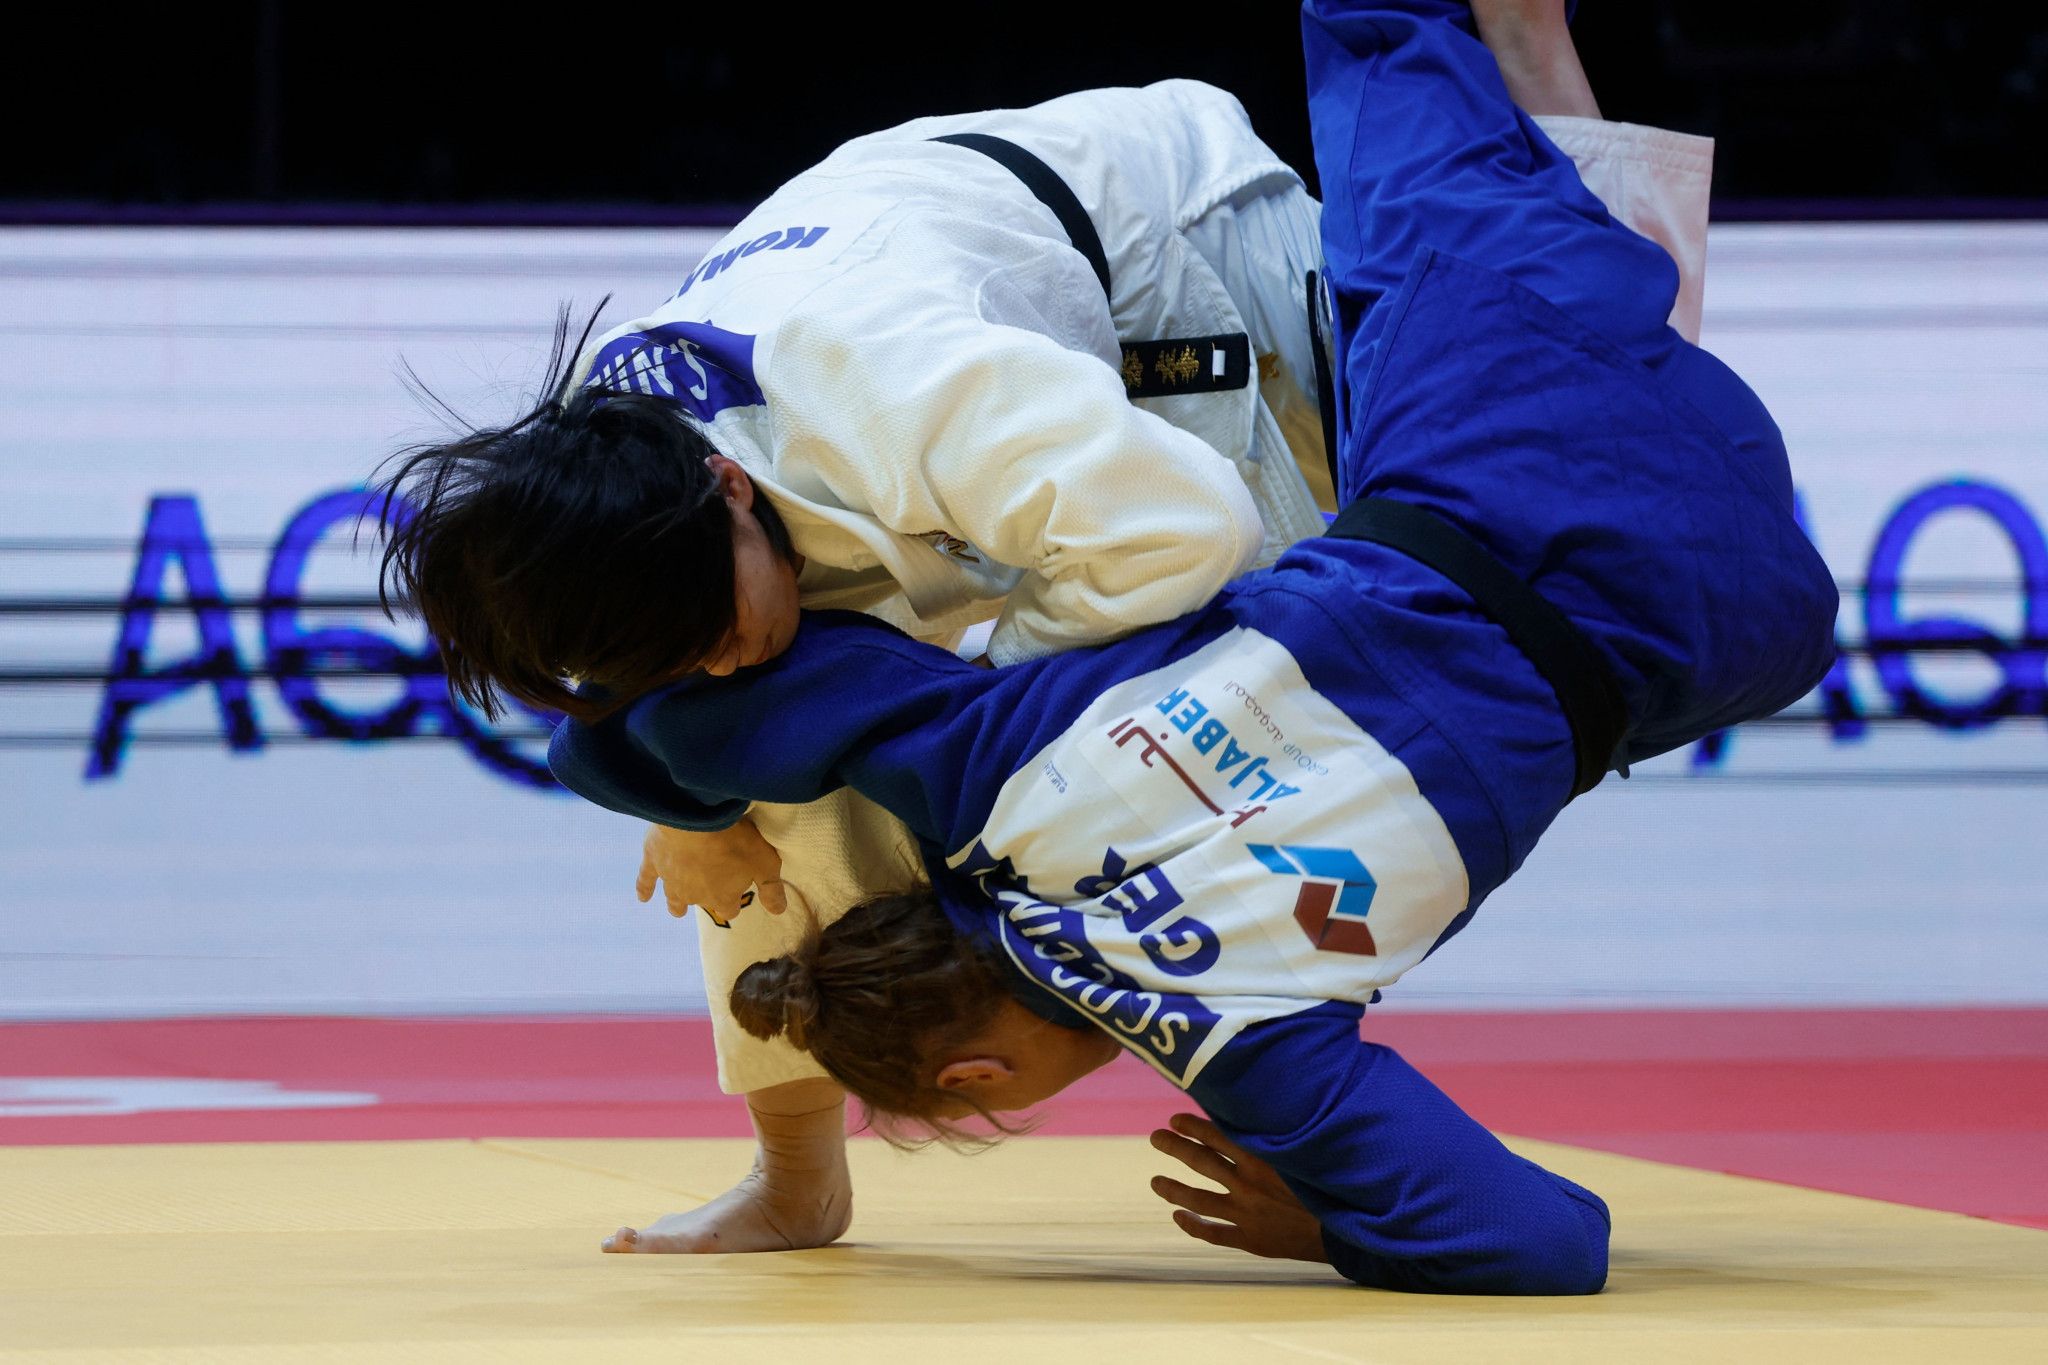 Germany’s Giovanna Scoccimarro is sent crashing following a brilliant throw by Japan's Saki Niizoe in the women's under-70kg final ©Getty Images